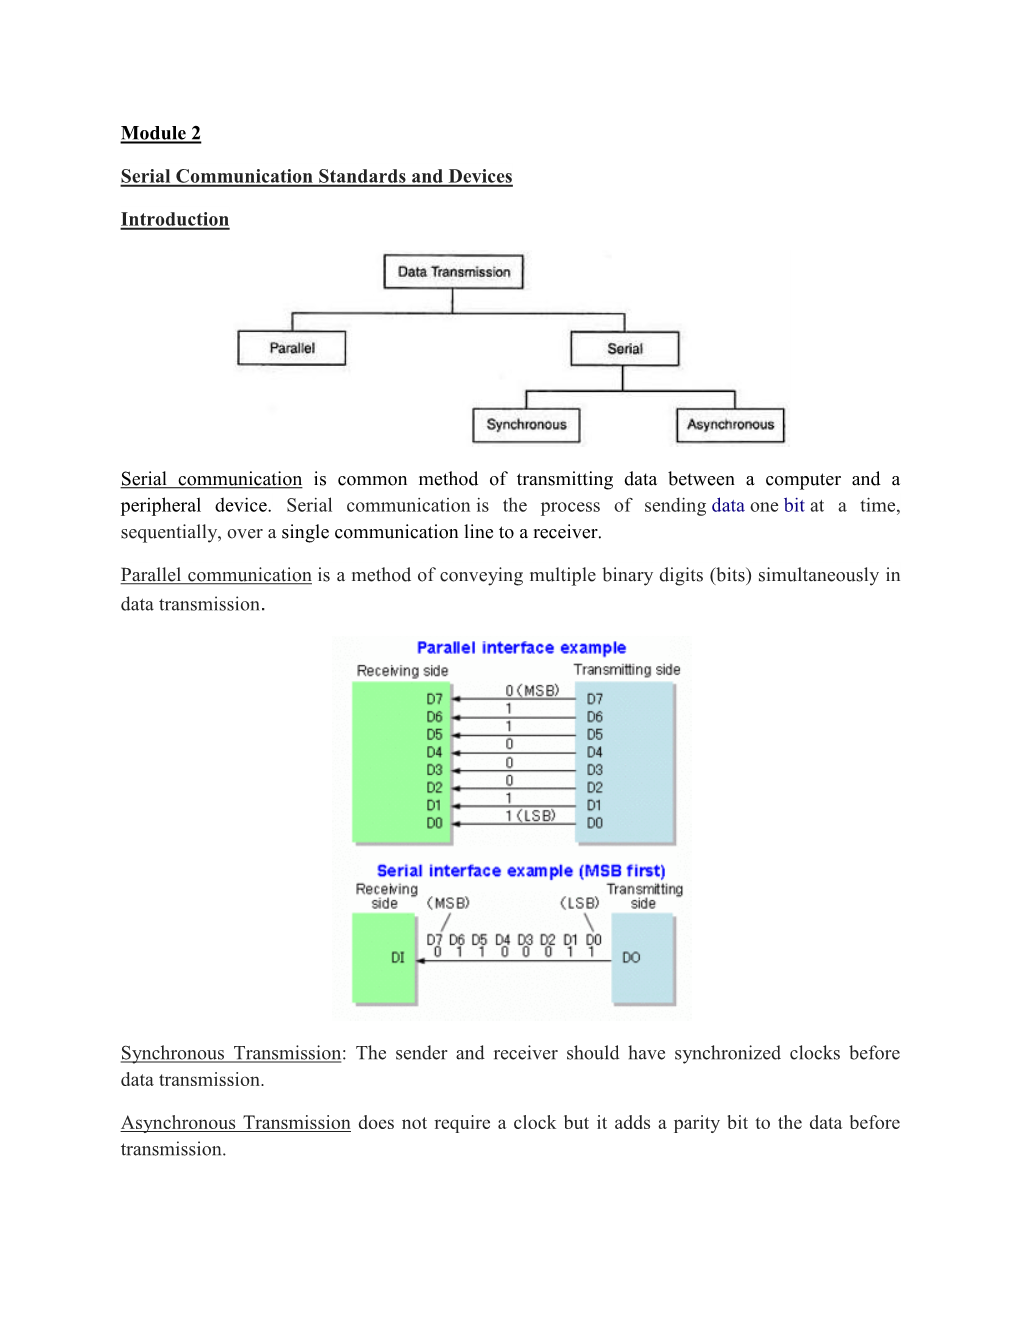 Module 2 Serial Communication Standards and Devices Introduction